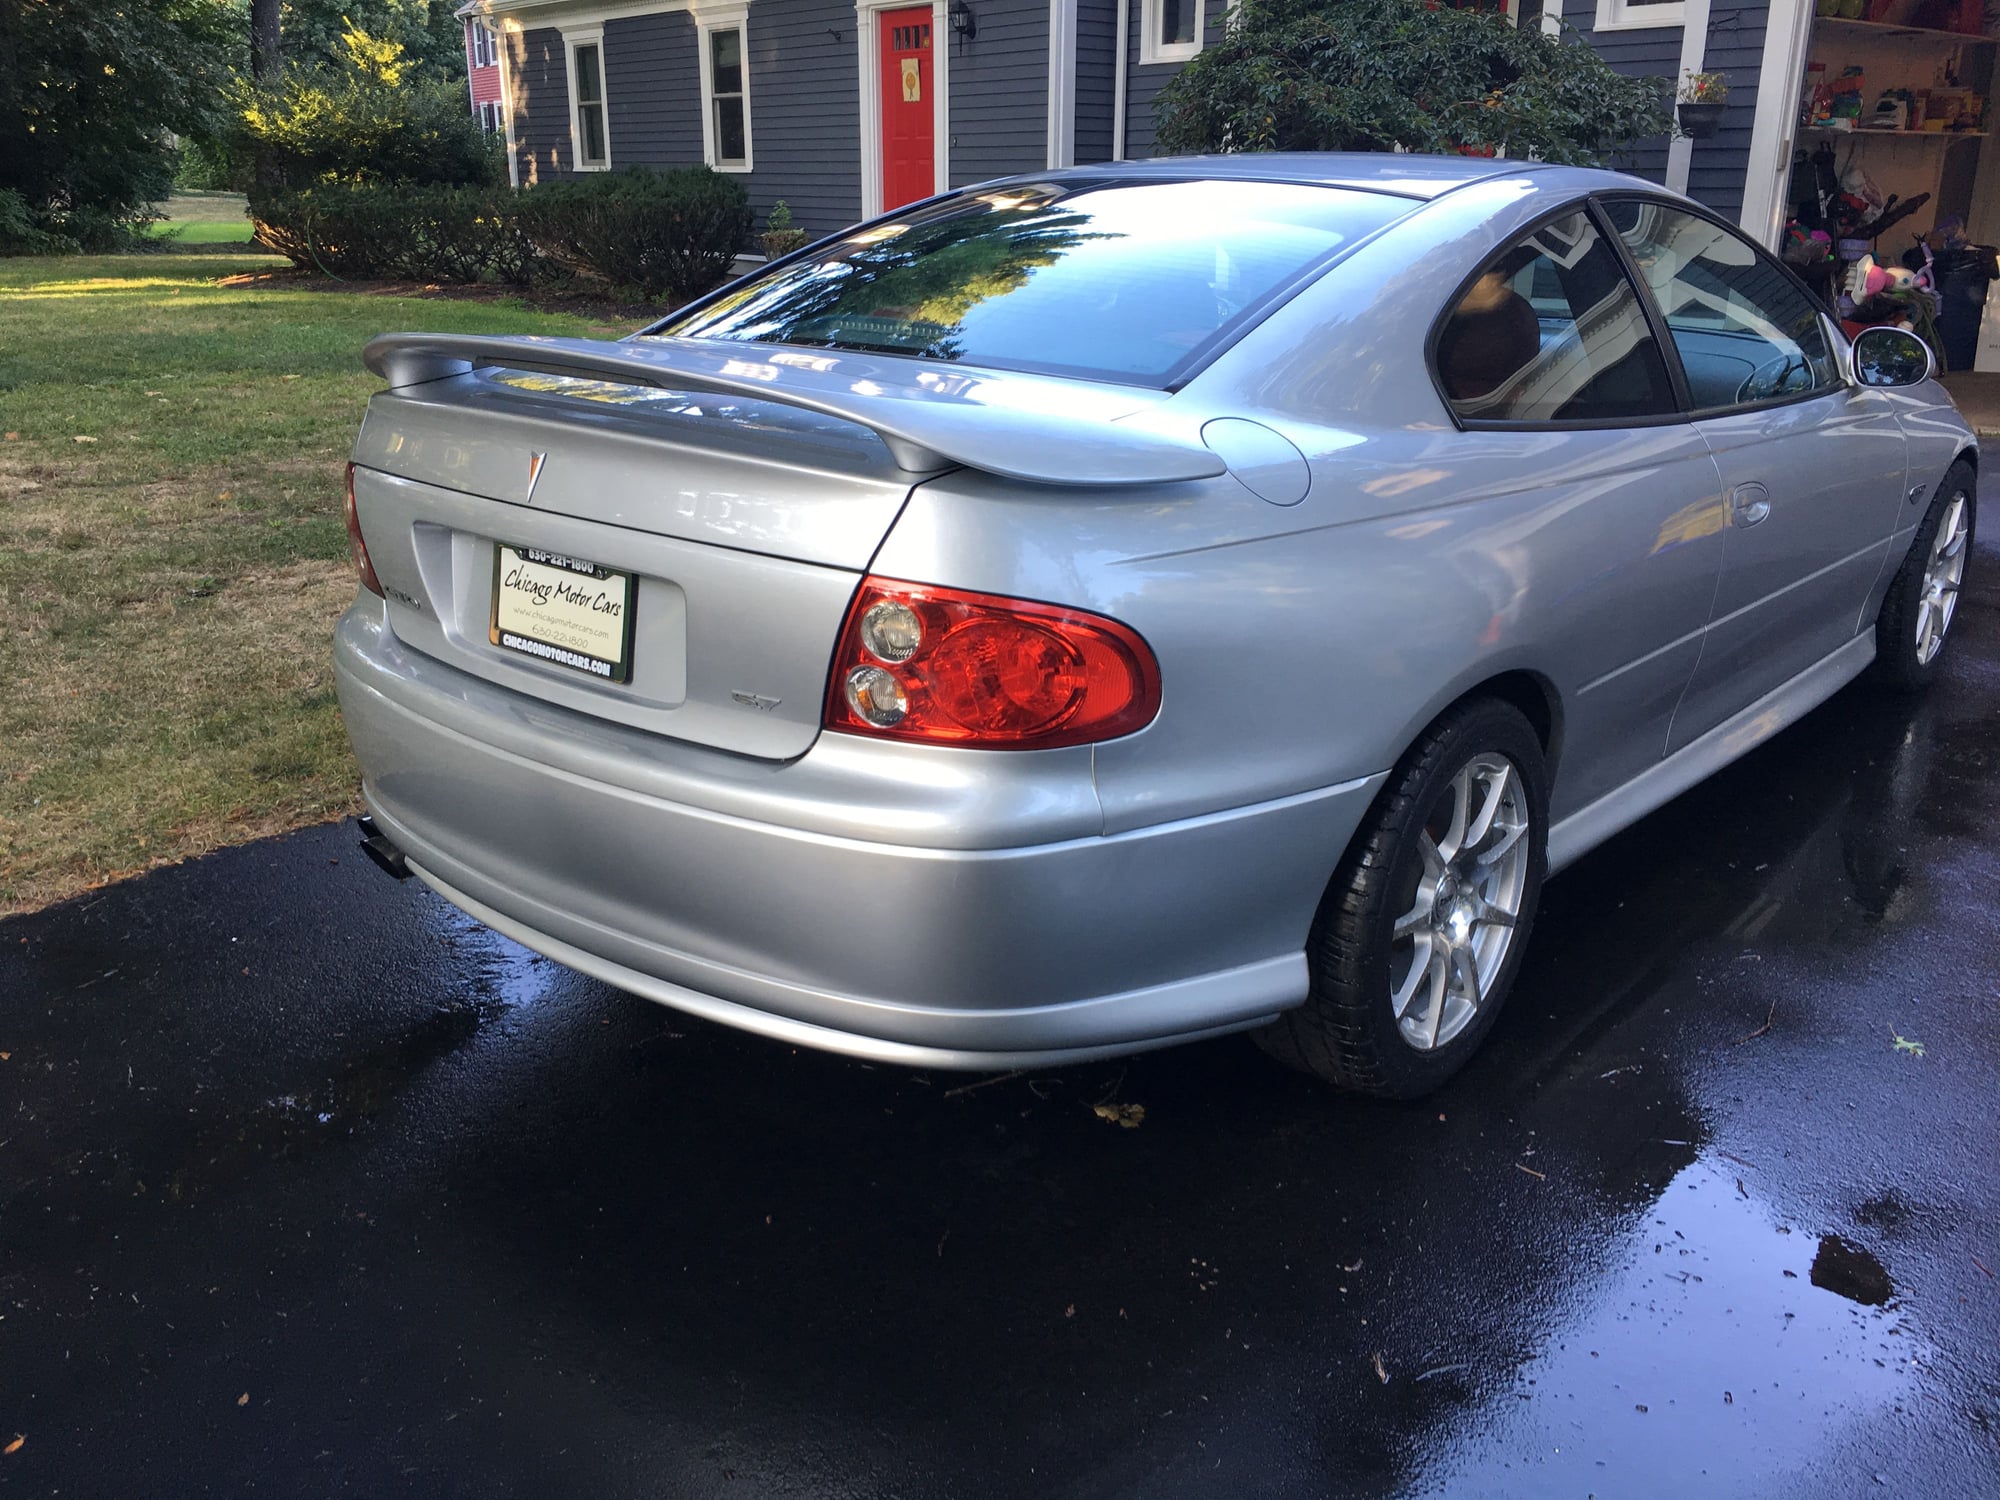 2004 Pontiac GTO - 2004 GTO M6 with LS3 - Used - VIN 6G2VX12GX4L287411 - 9,999,999 Miles - 8 cyl - 2WD - Manual - Coupe - Silver - Bridgewater, MA 02324, United States